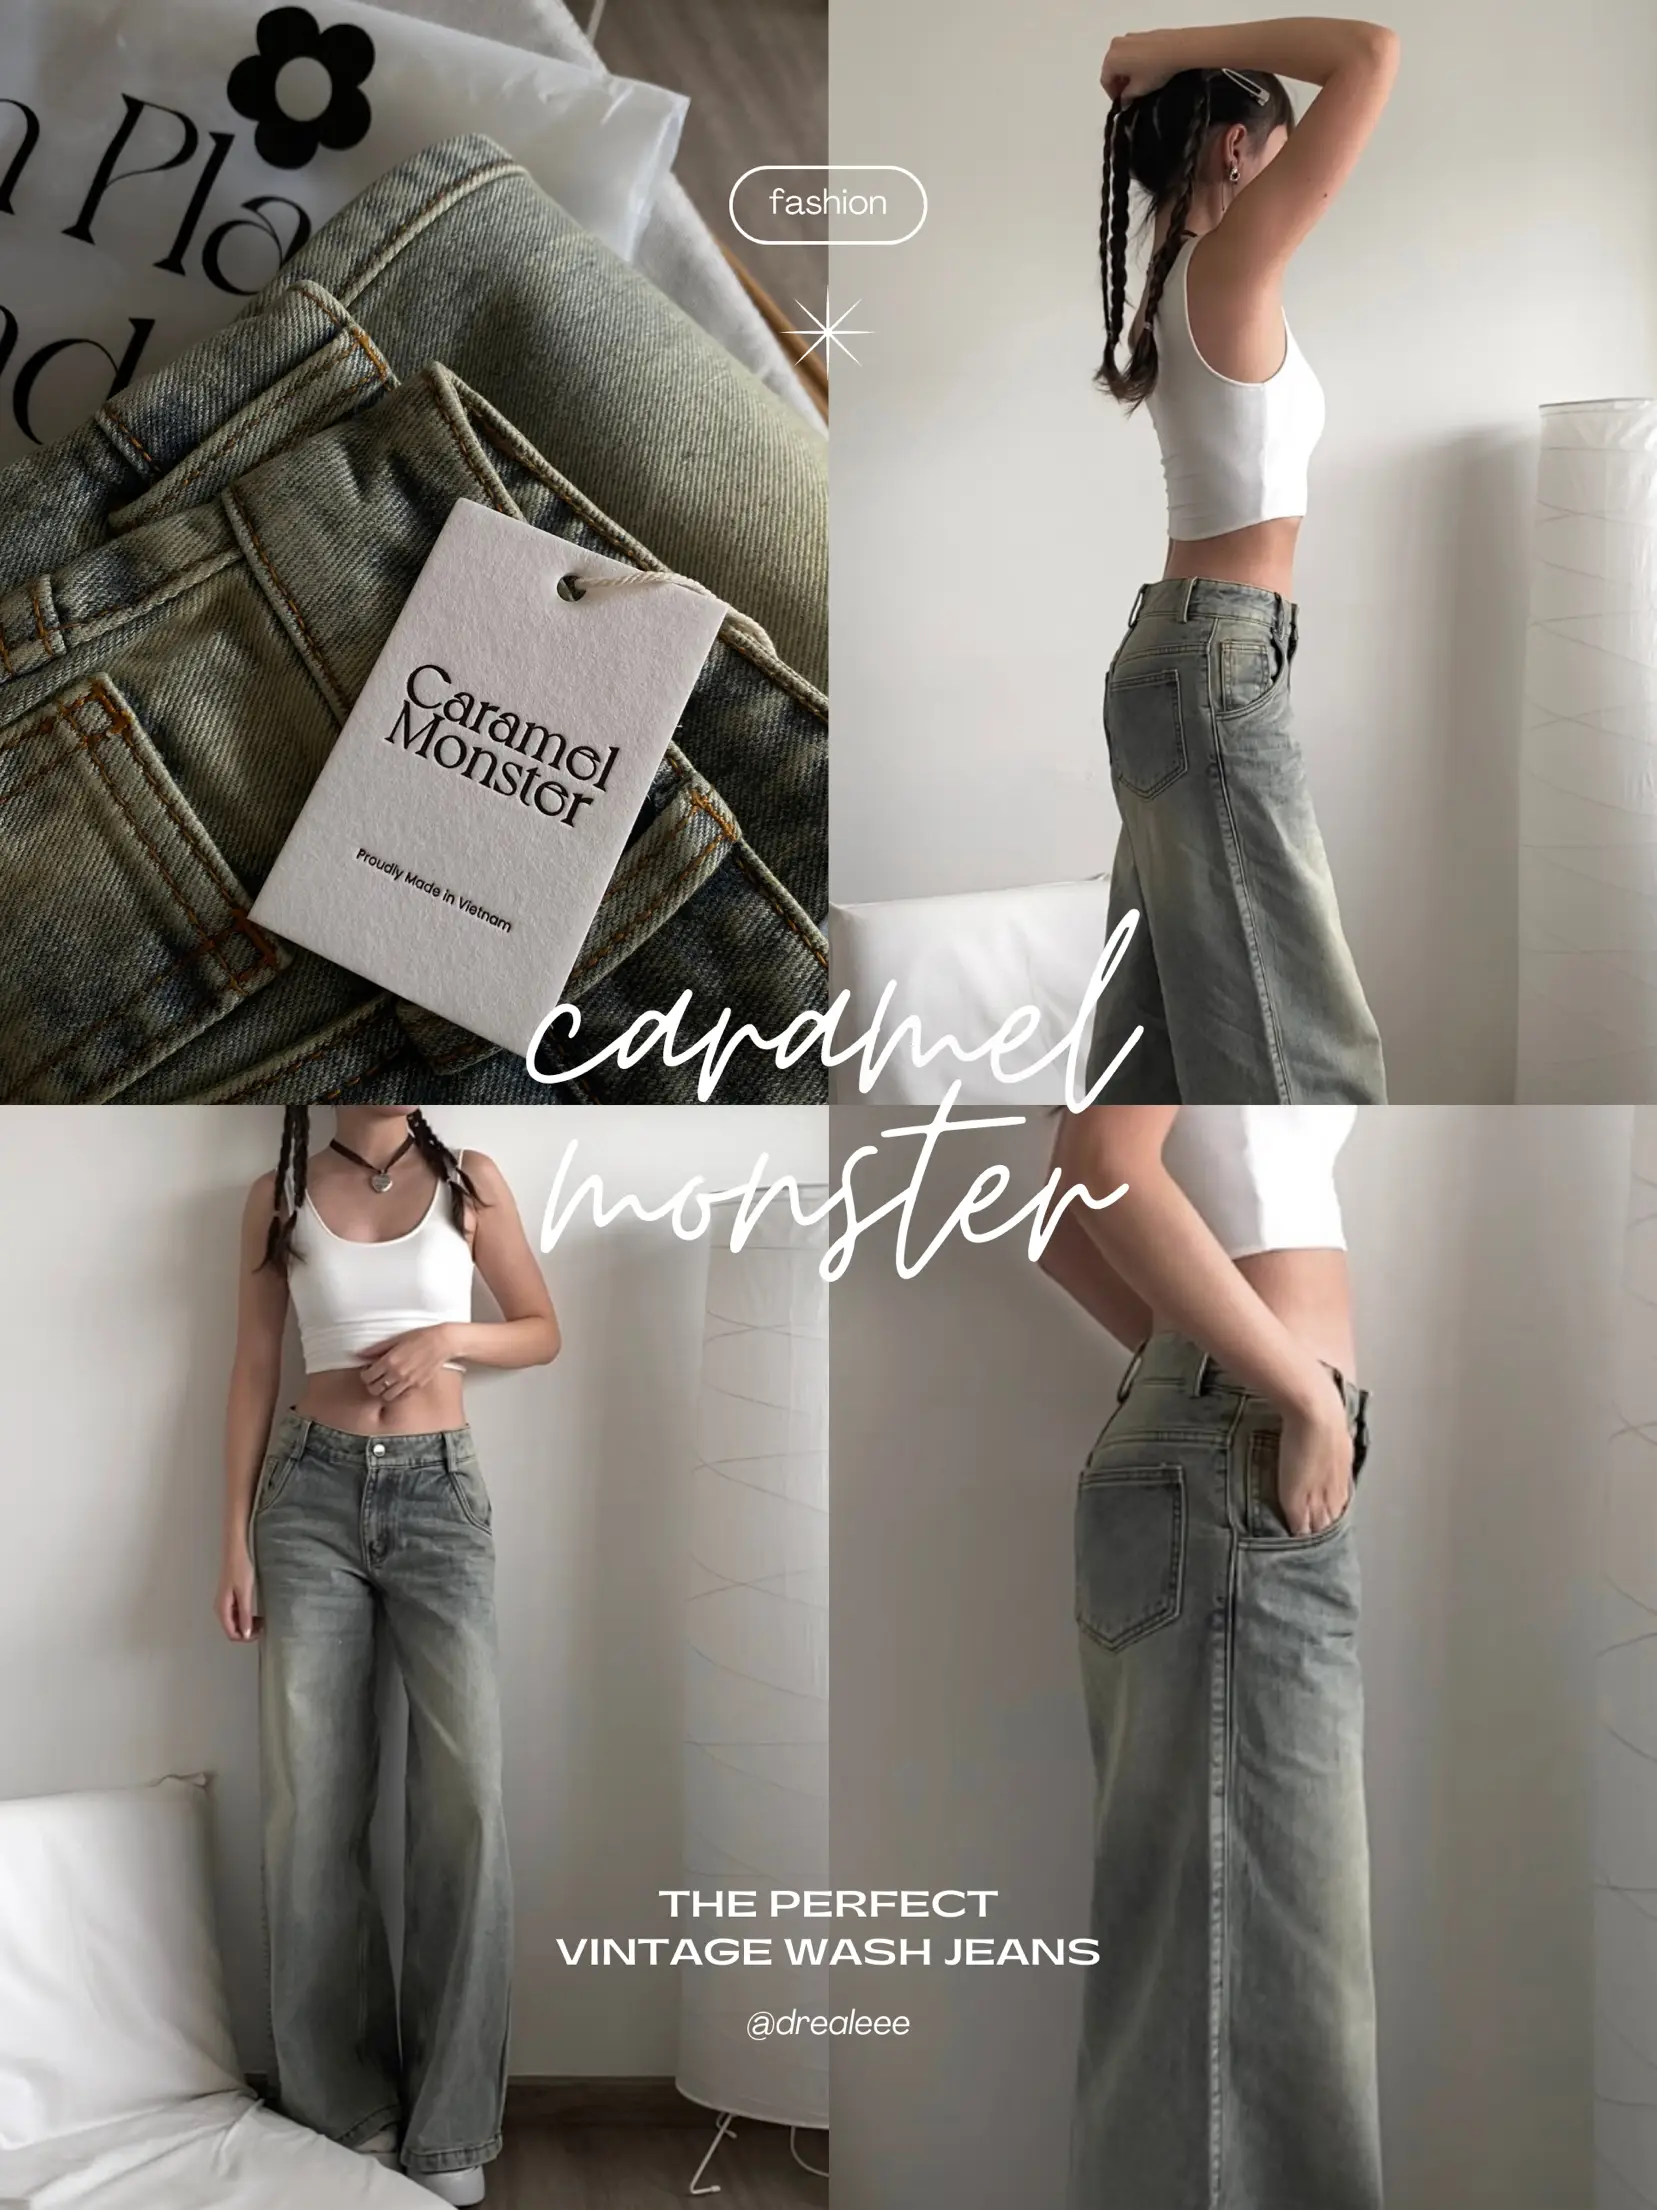 ✩ i found the perfect vintage wash jeans ✩ | Gallery posted by